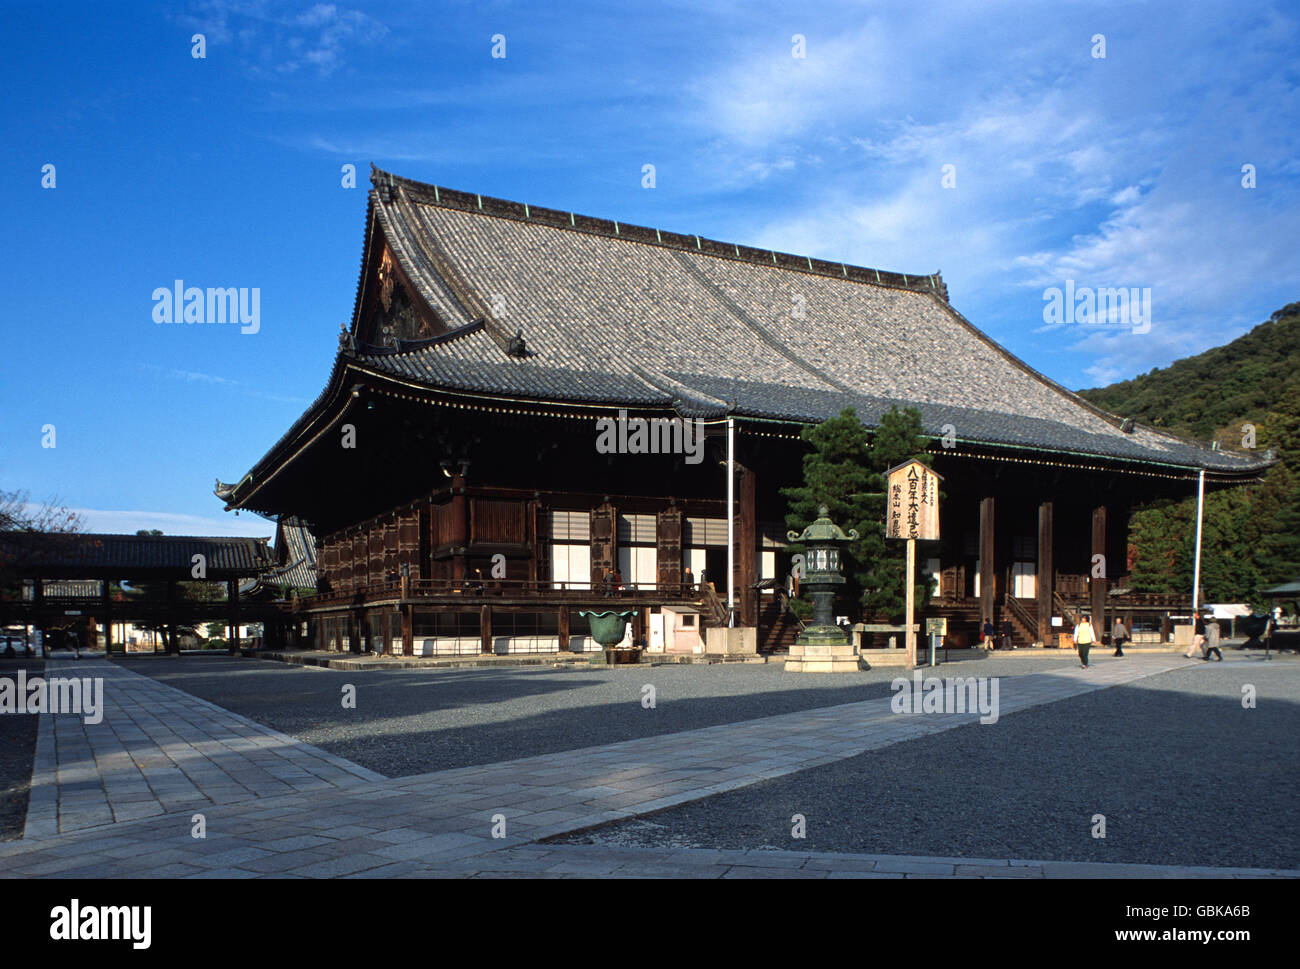 Chion-in temple, Kyoto, Japan, Asia Stock Photo